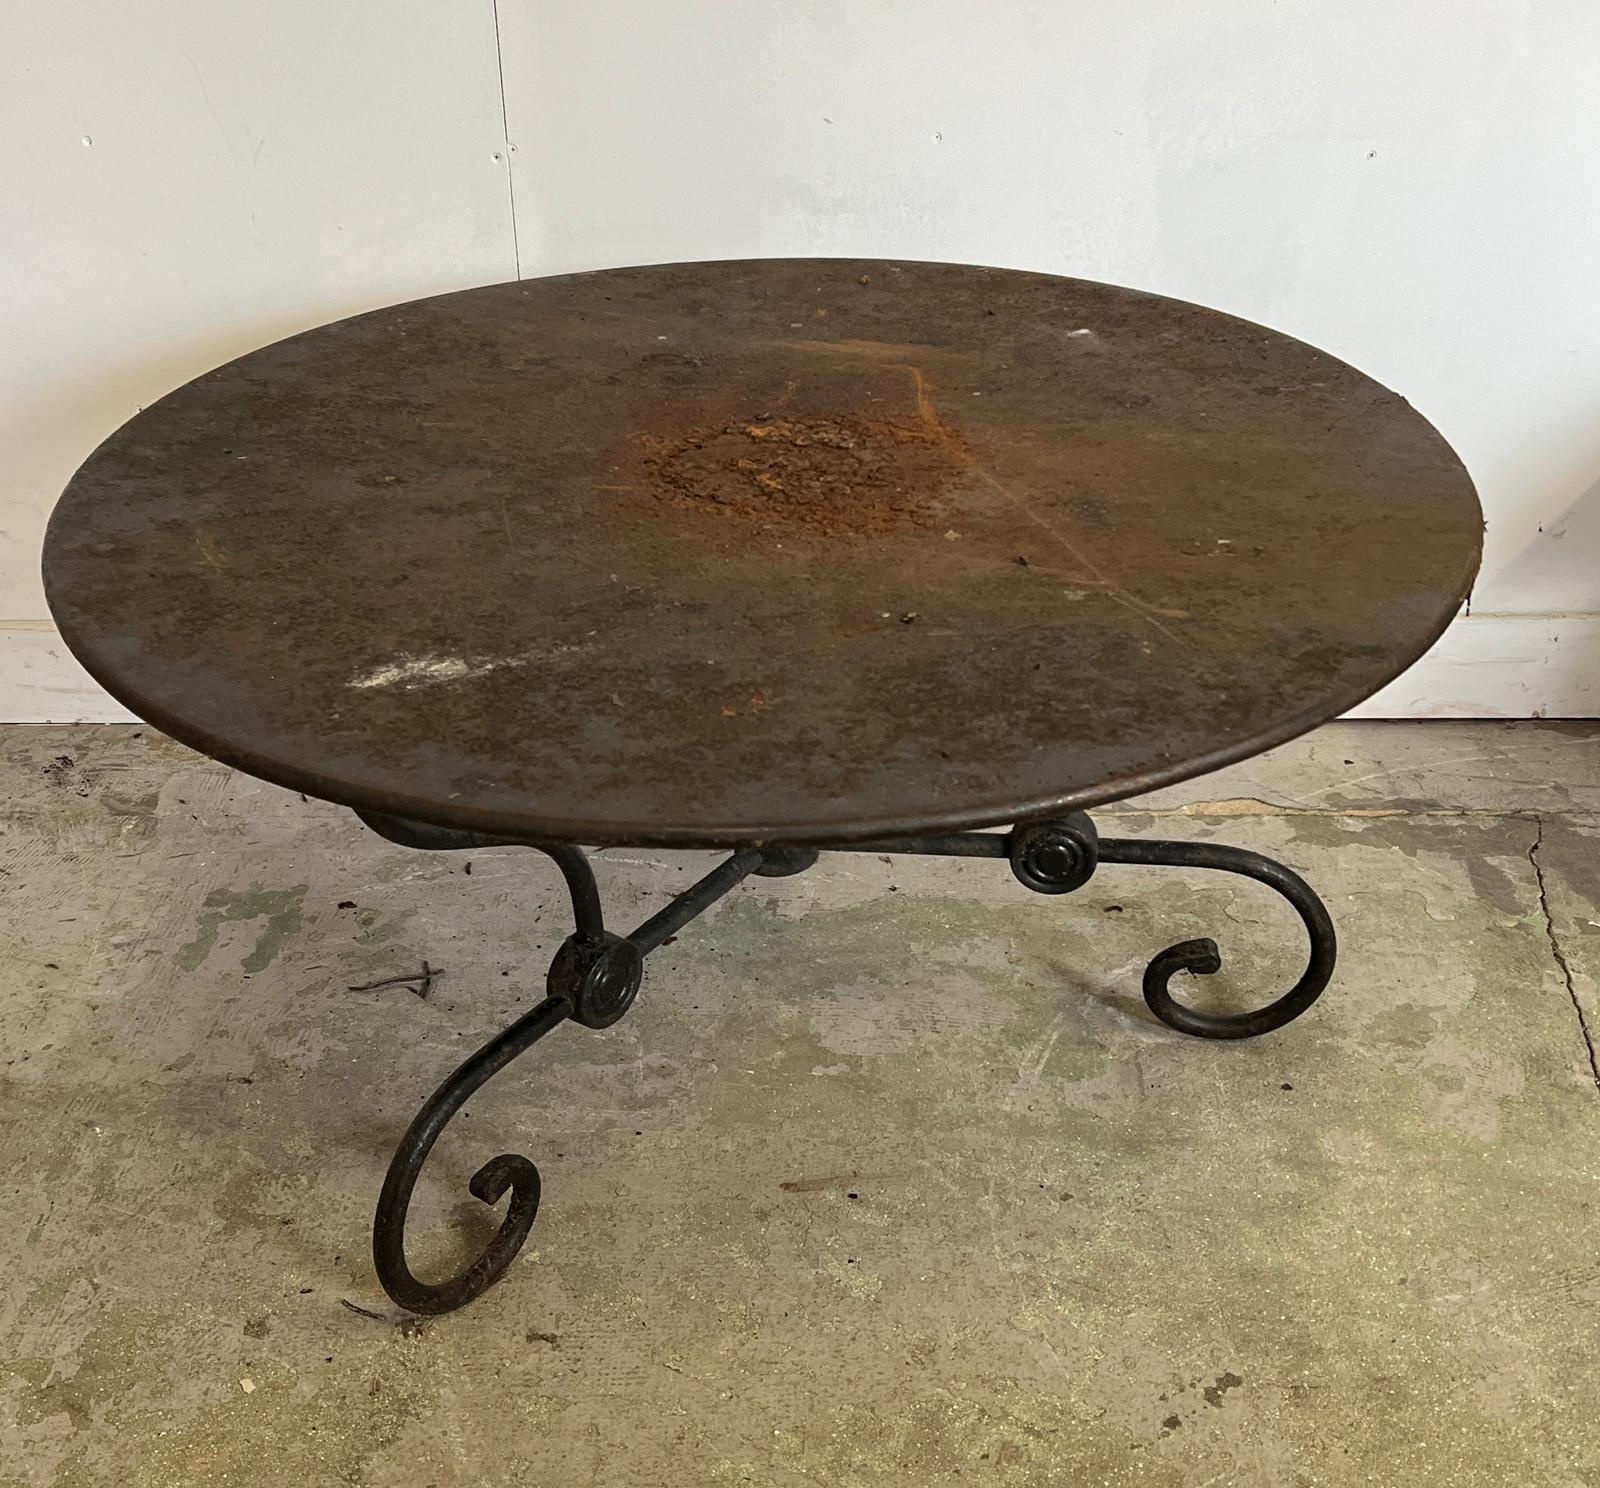 A French style round decorative garden table with scrolling iron work legs (H54cm Dia100cm)